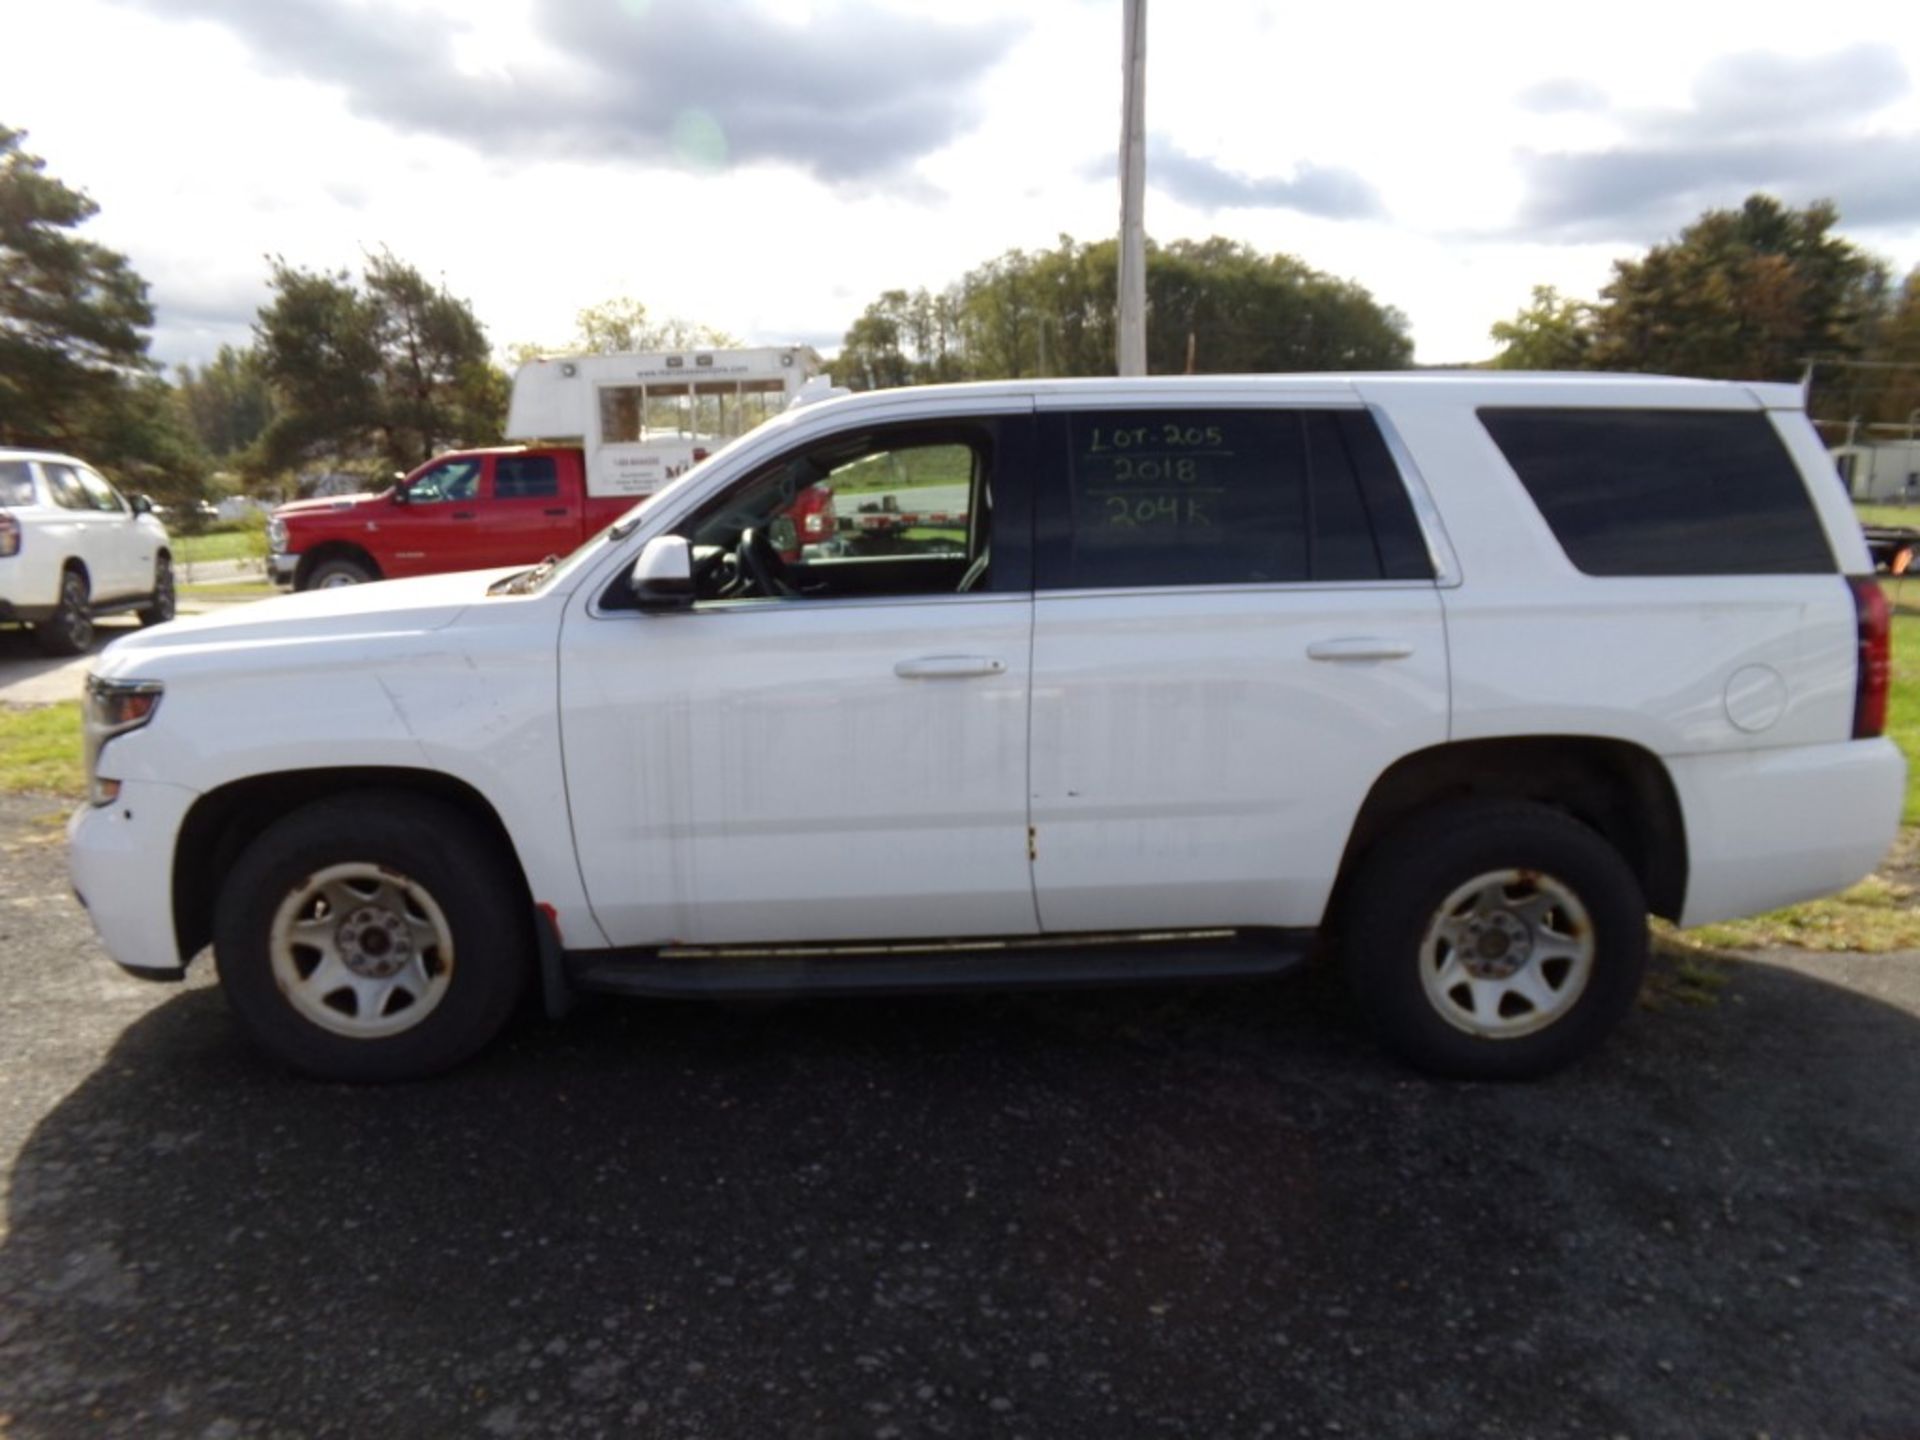 2018 Chevrolet Tahoe Commercial 4x4, White, 204,749 Mi, NEEDS MANIFOLD WORK, FACTORY CENTER